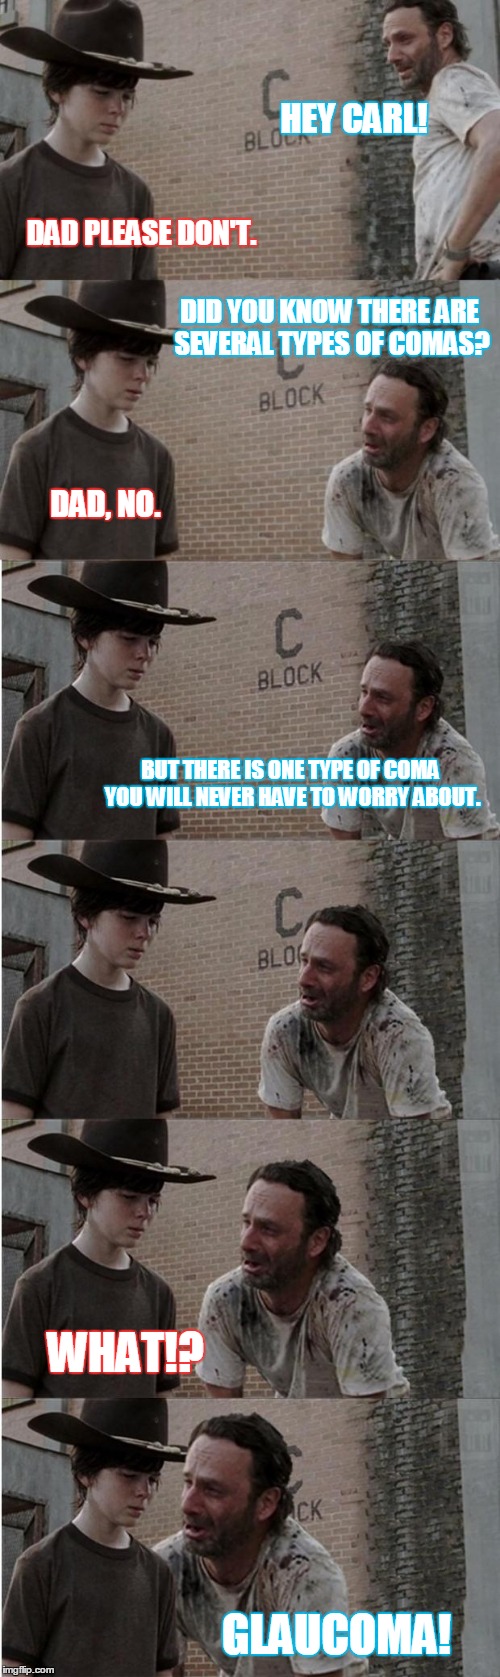 Rick and Carl Longer Meme | HEY CARL! DAD PLEASE DON'T. DID YOU KNOW THERE ARE SEVERAL TYPES OF COMAS? DAD, NO. BUT THERE IS ONE TYPE OF COMA YOU WILL NEVER HAVE TO WORRY ABOUT. WHAT!? GLAUCOMA! | image tagged in memes,rick and carl longer | made w/ Imgflip meme maker